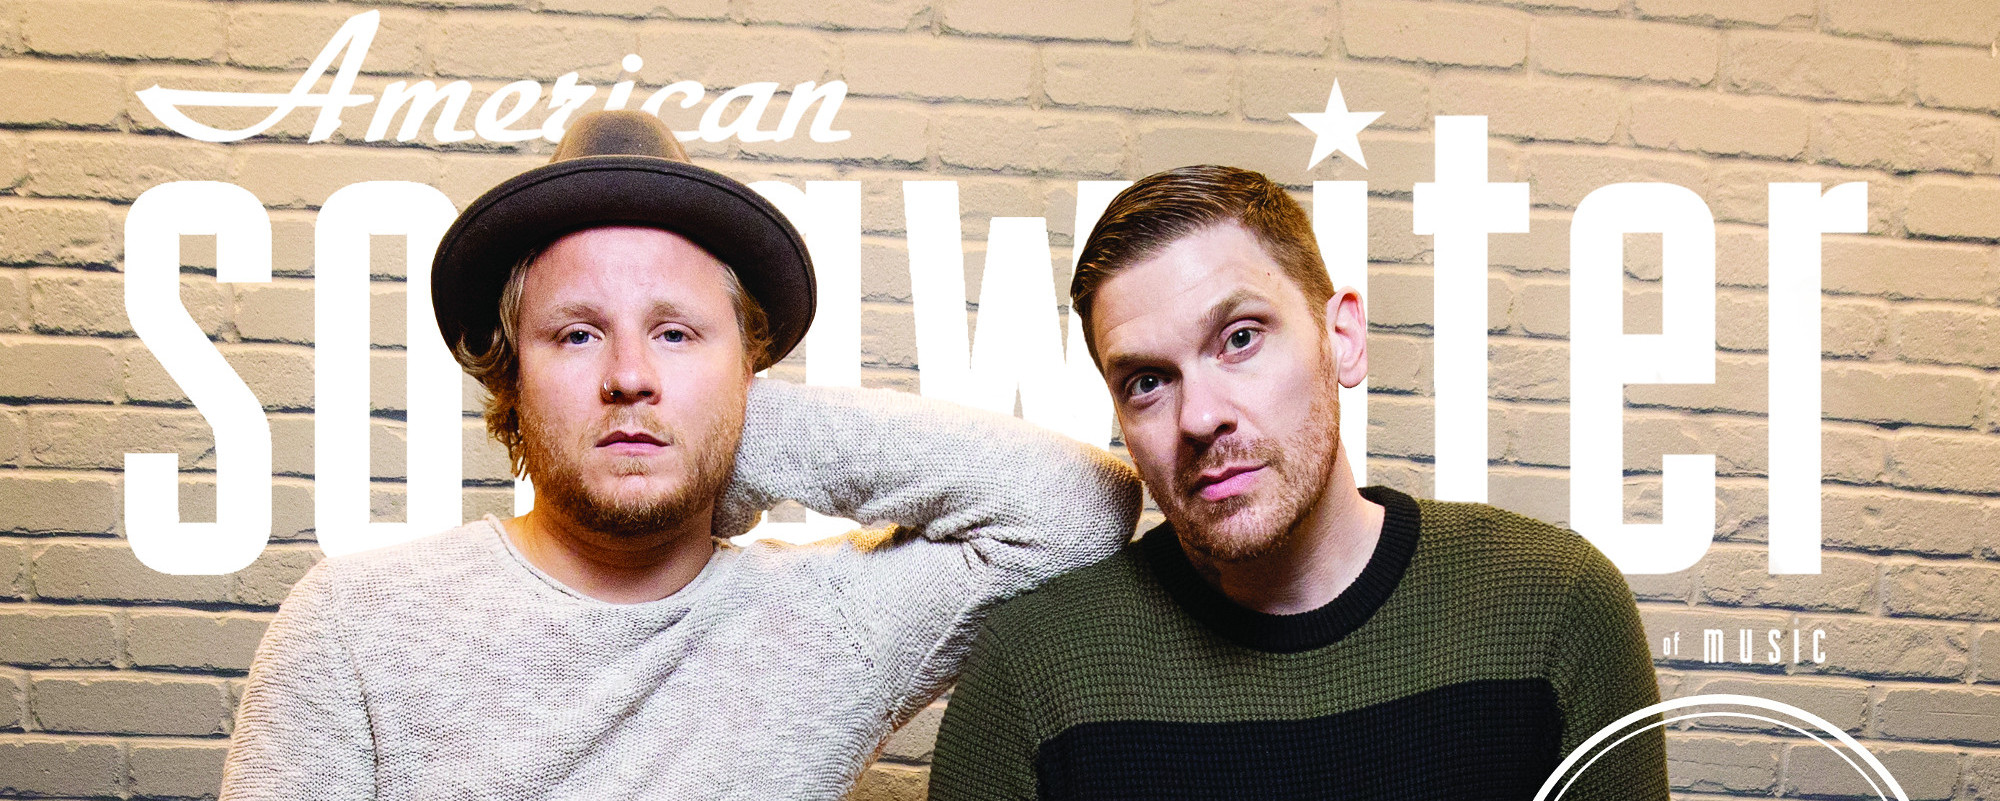 Shinedown’s Brent Smith And Zach Myers Talk About Their Sprawling Yet Intimate New Pair Of Albums As A Duo